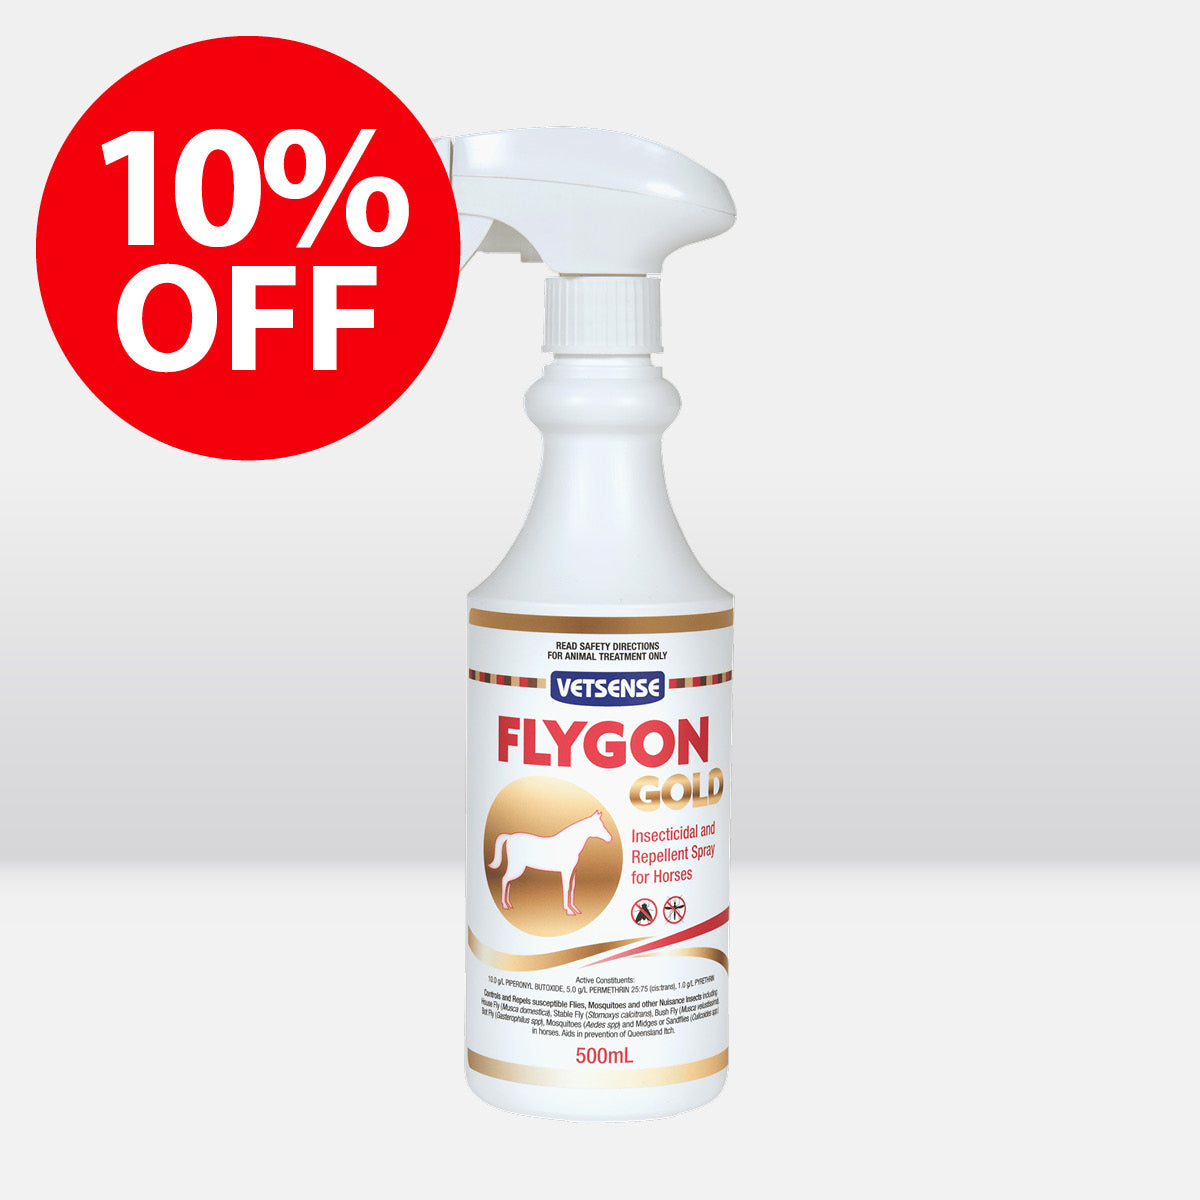 Flygon GOLD Insecticidal & Repellent Spray for Horses 500ml ON SALE NOW